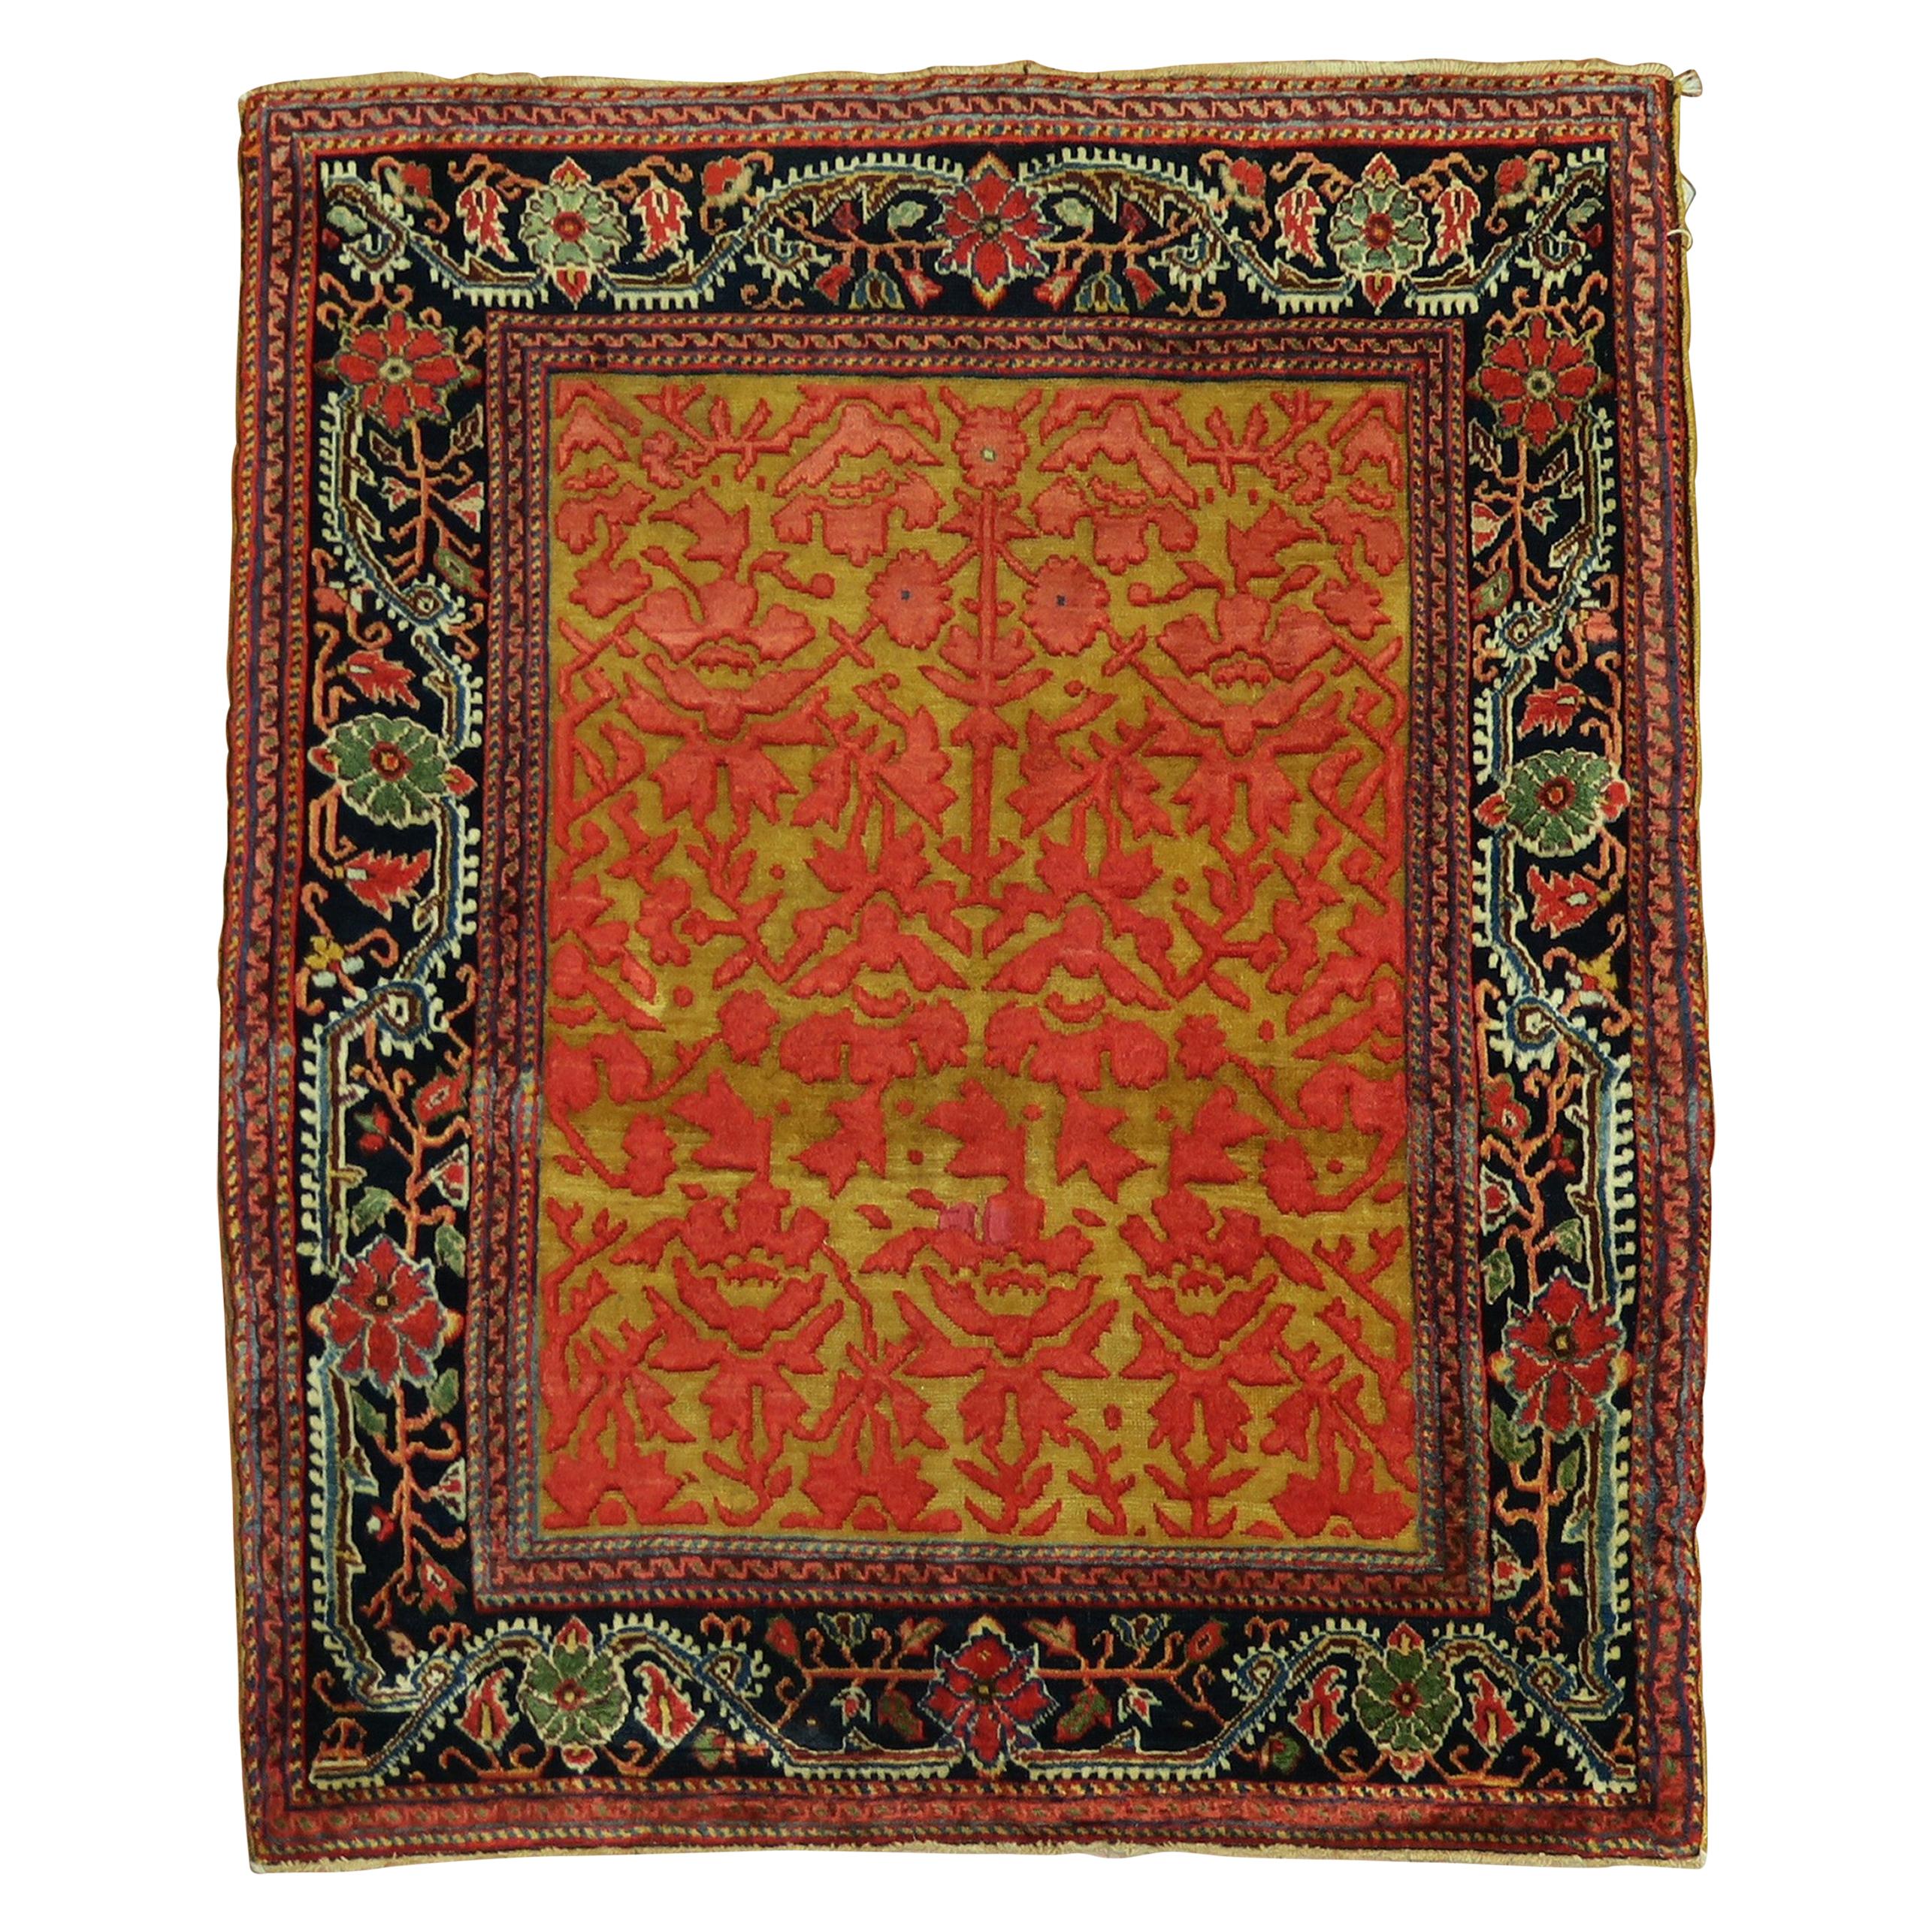 Jewel Tone Early 20th Century Superfine Quality Antique Persian Jozan Souf Mat For Sale